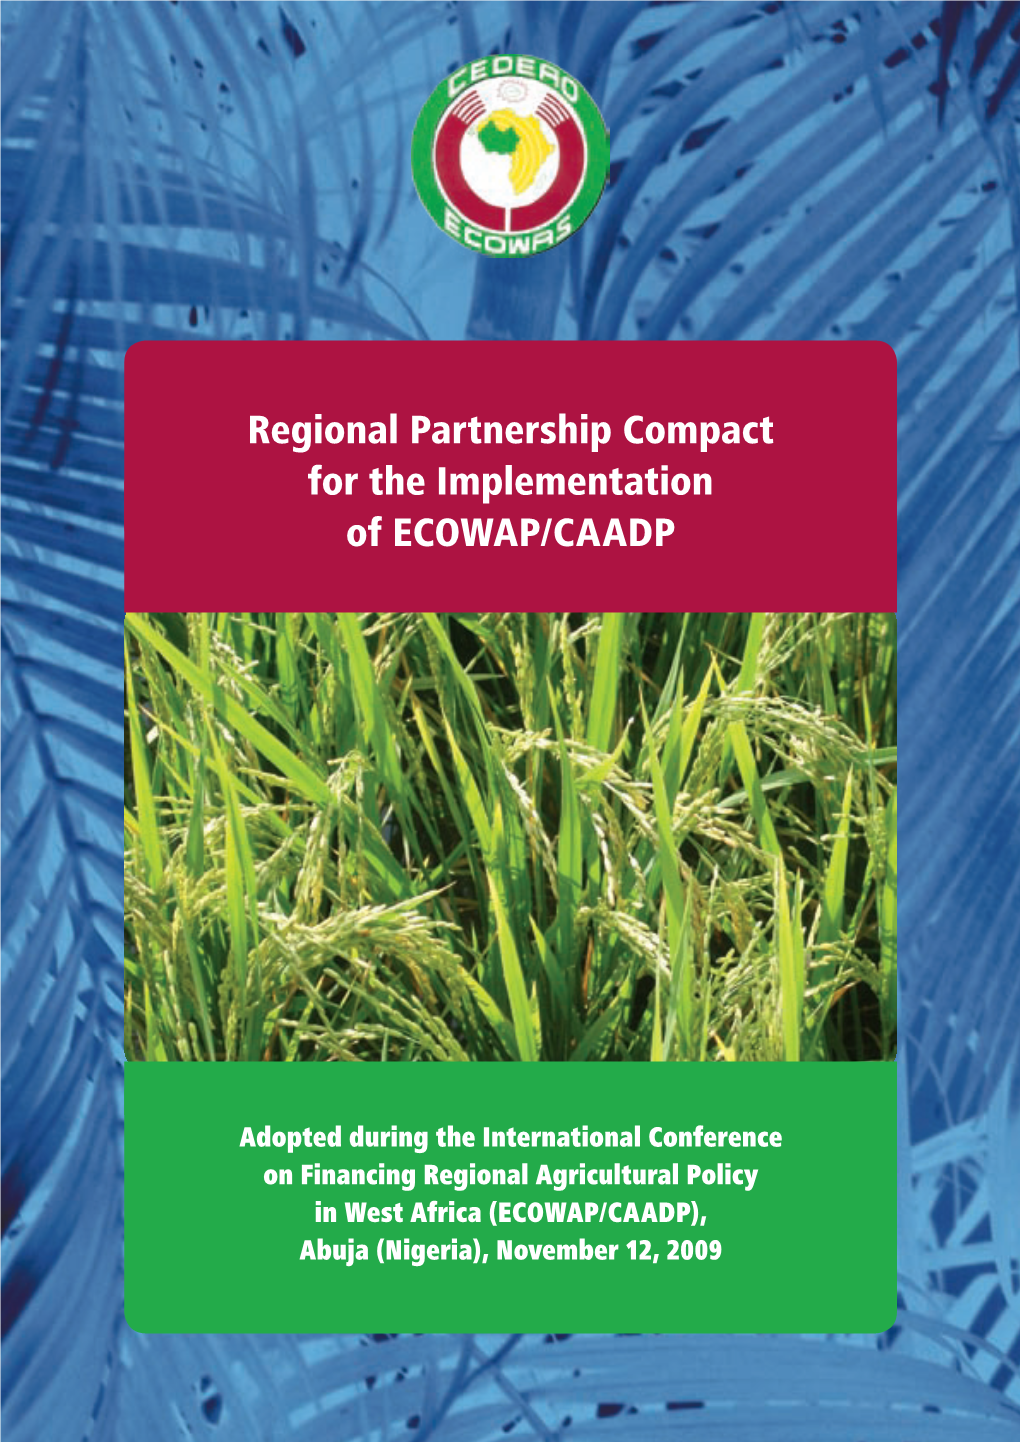 Regional Partnership Compact for the Implementation of ECOWAP/CAADP